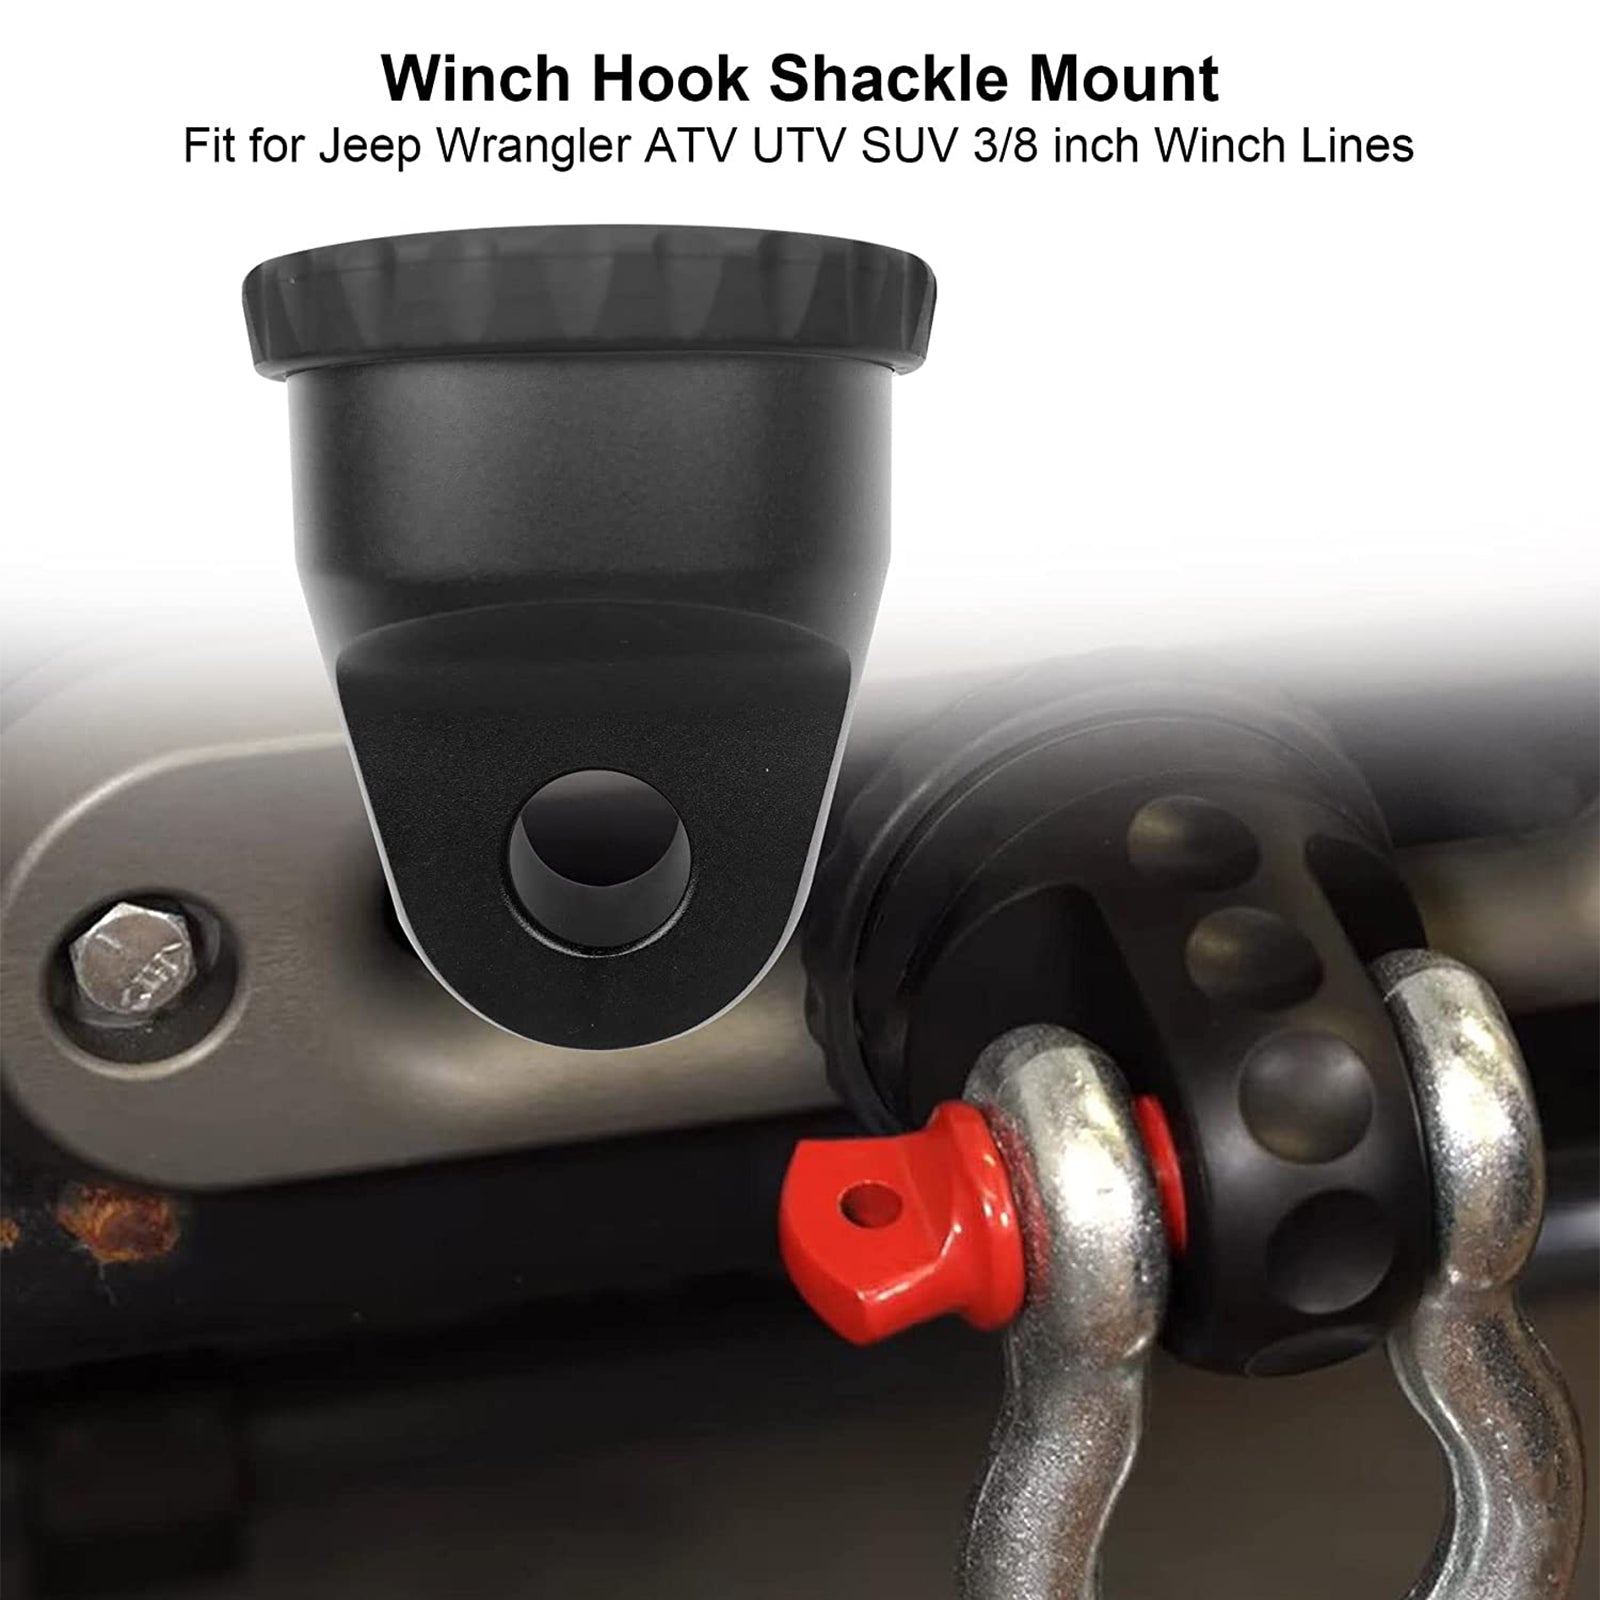 OPENROAD Winch Hook Shackle 3/4" D-Ring 22000 lbs Load Rating  openroad4wd.com   